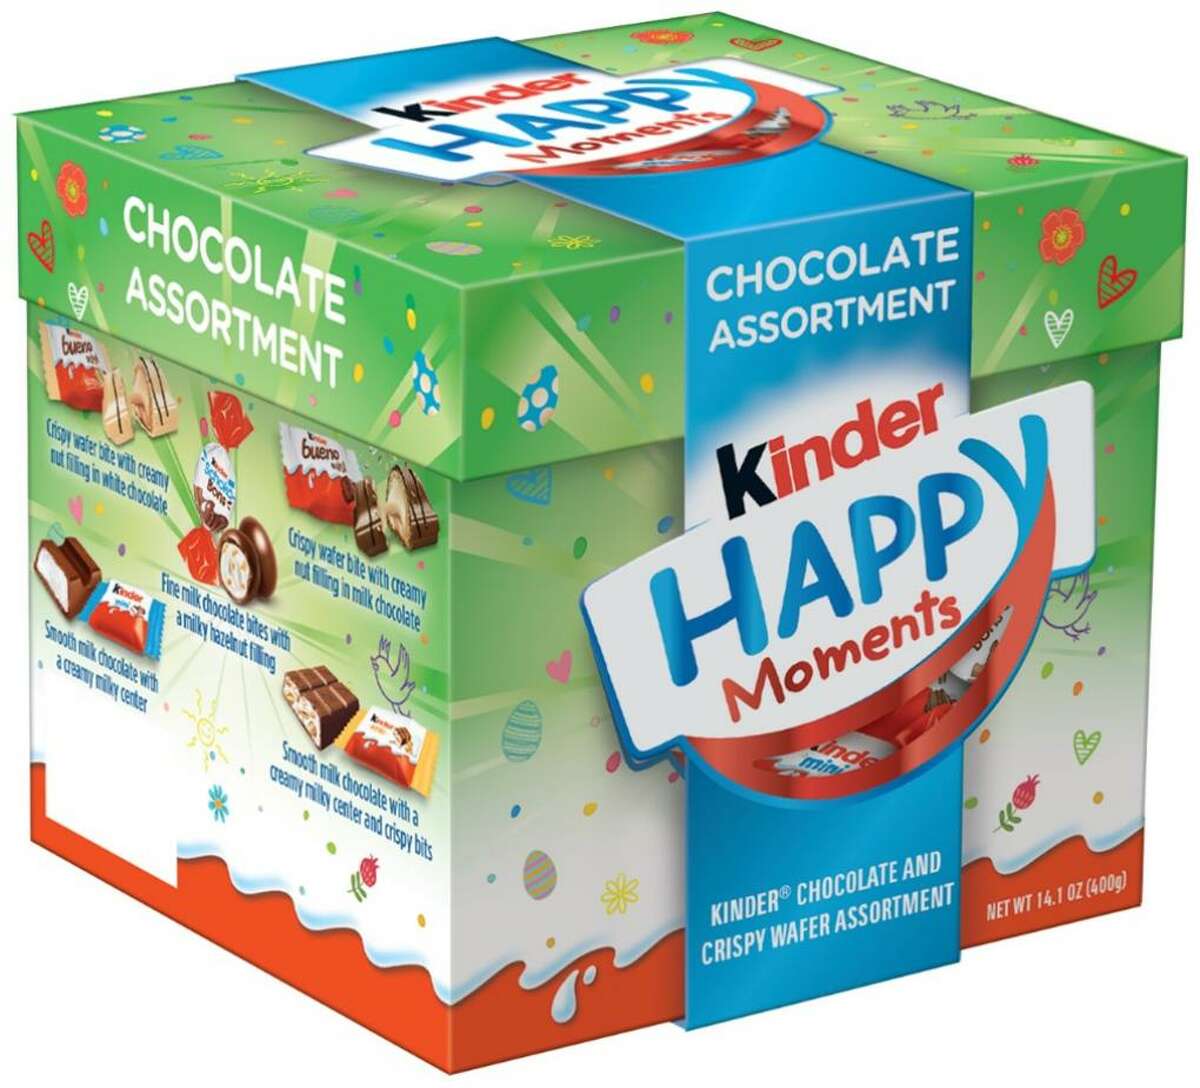 Kinder Happy Moments Chocolate Assortment and Kinder Mix Chocolate Treats basket are the recalled items.